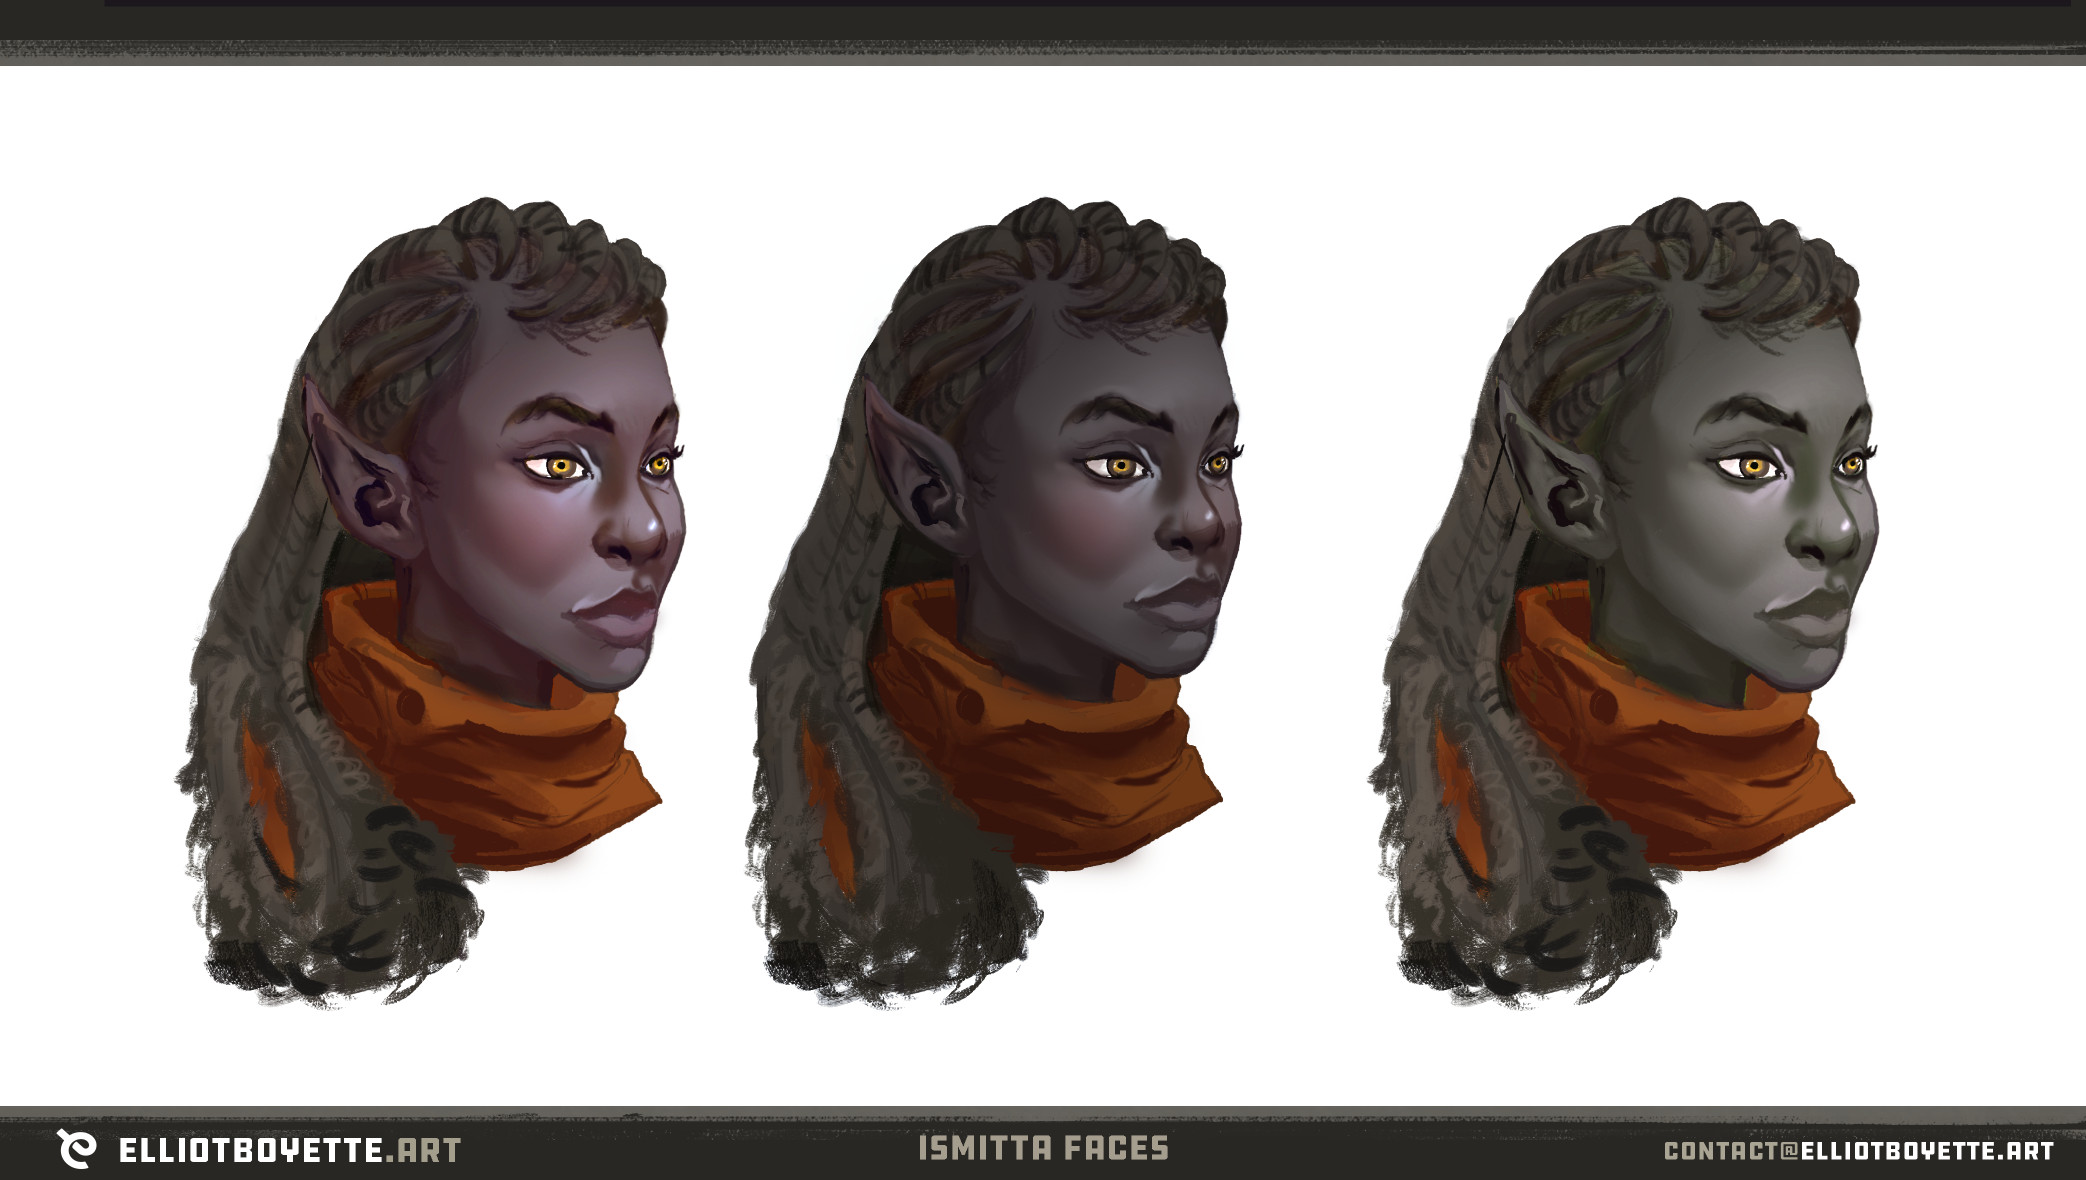 From the notes/board I took some attempts to get the right dark elf tone and other 